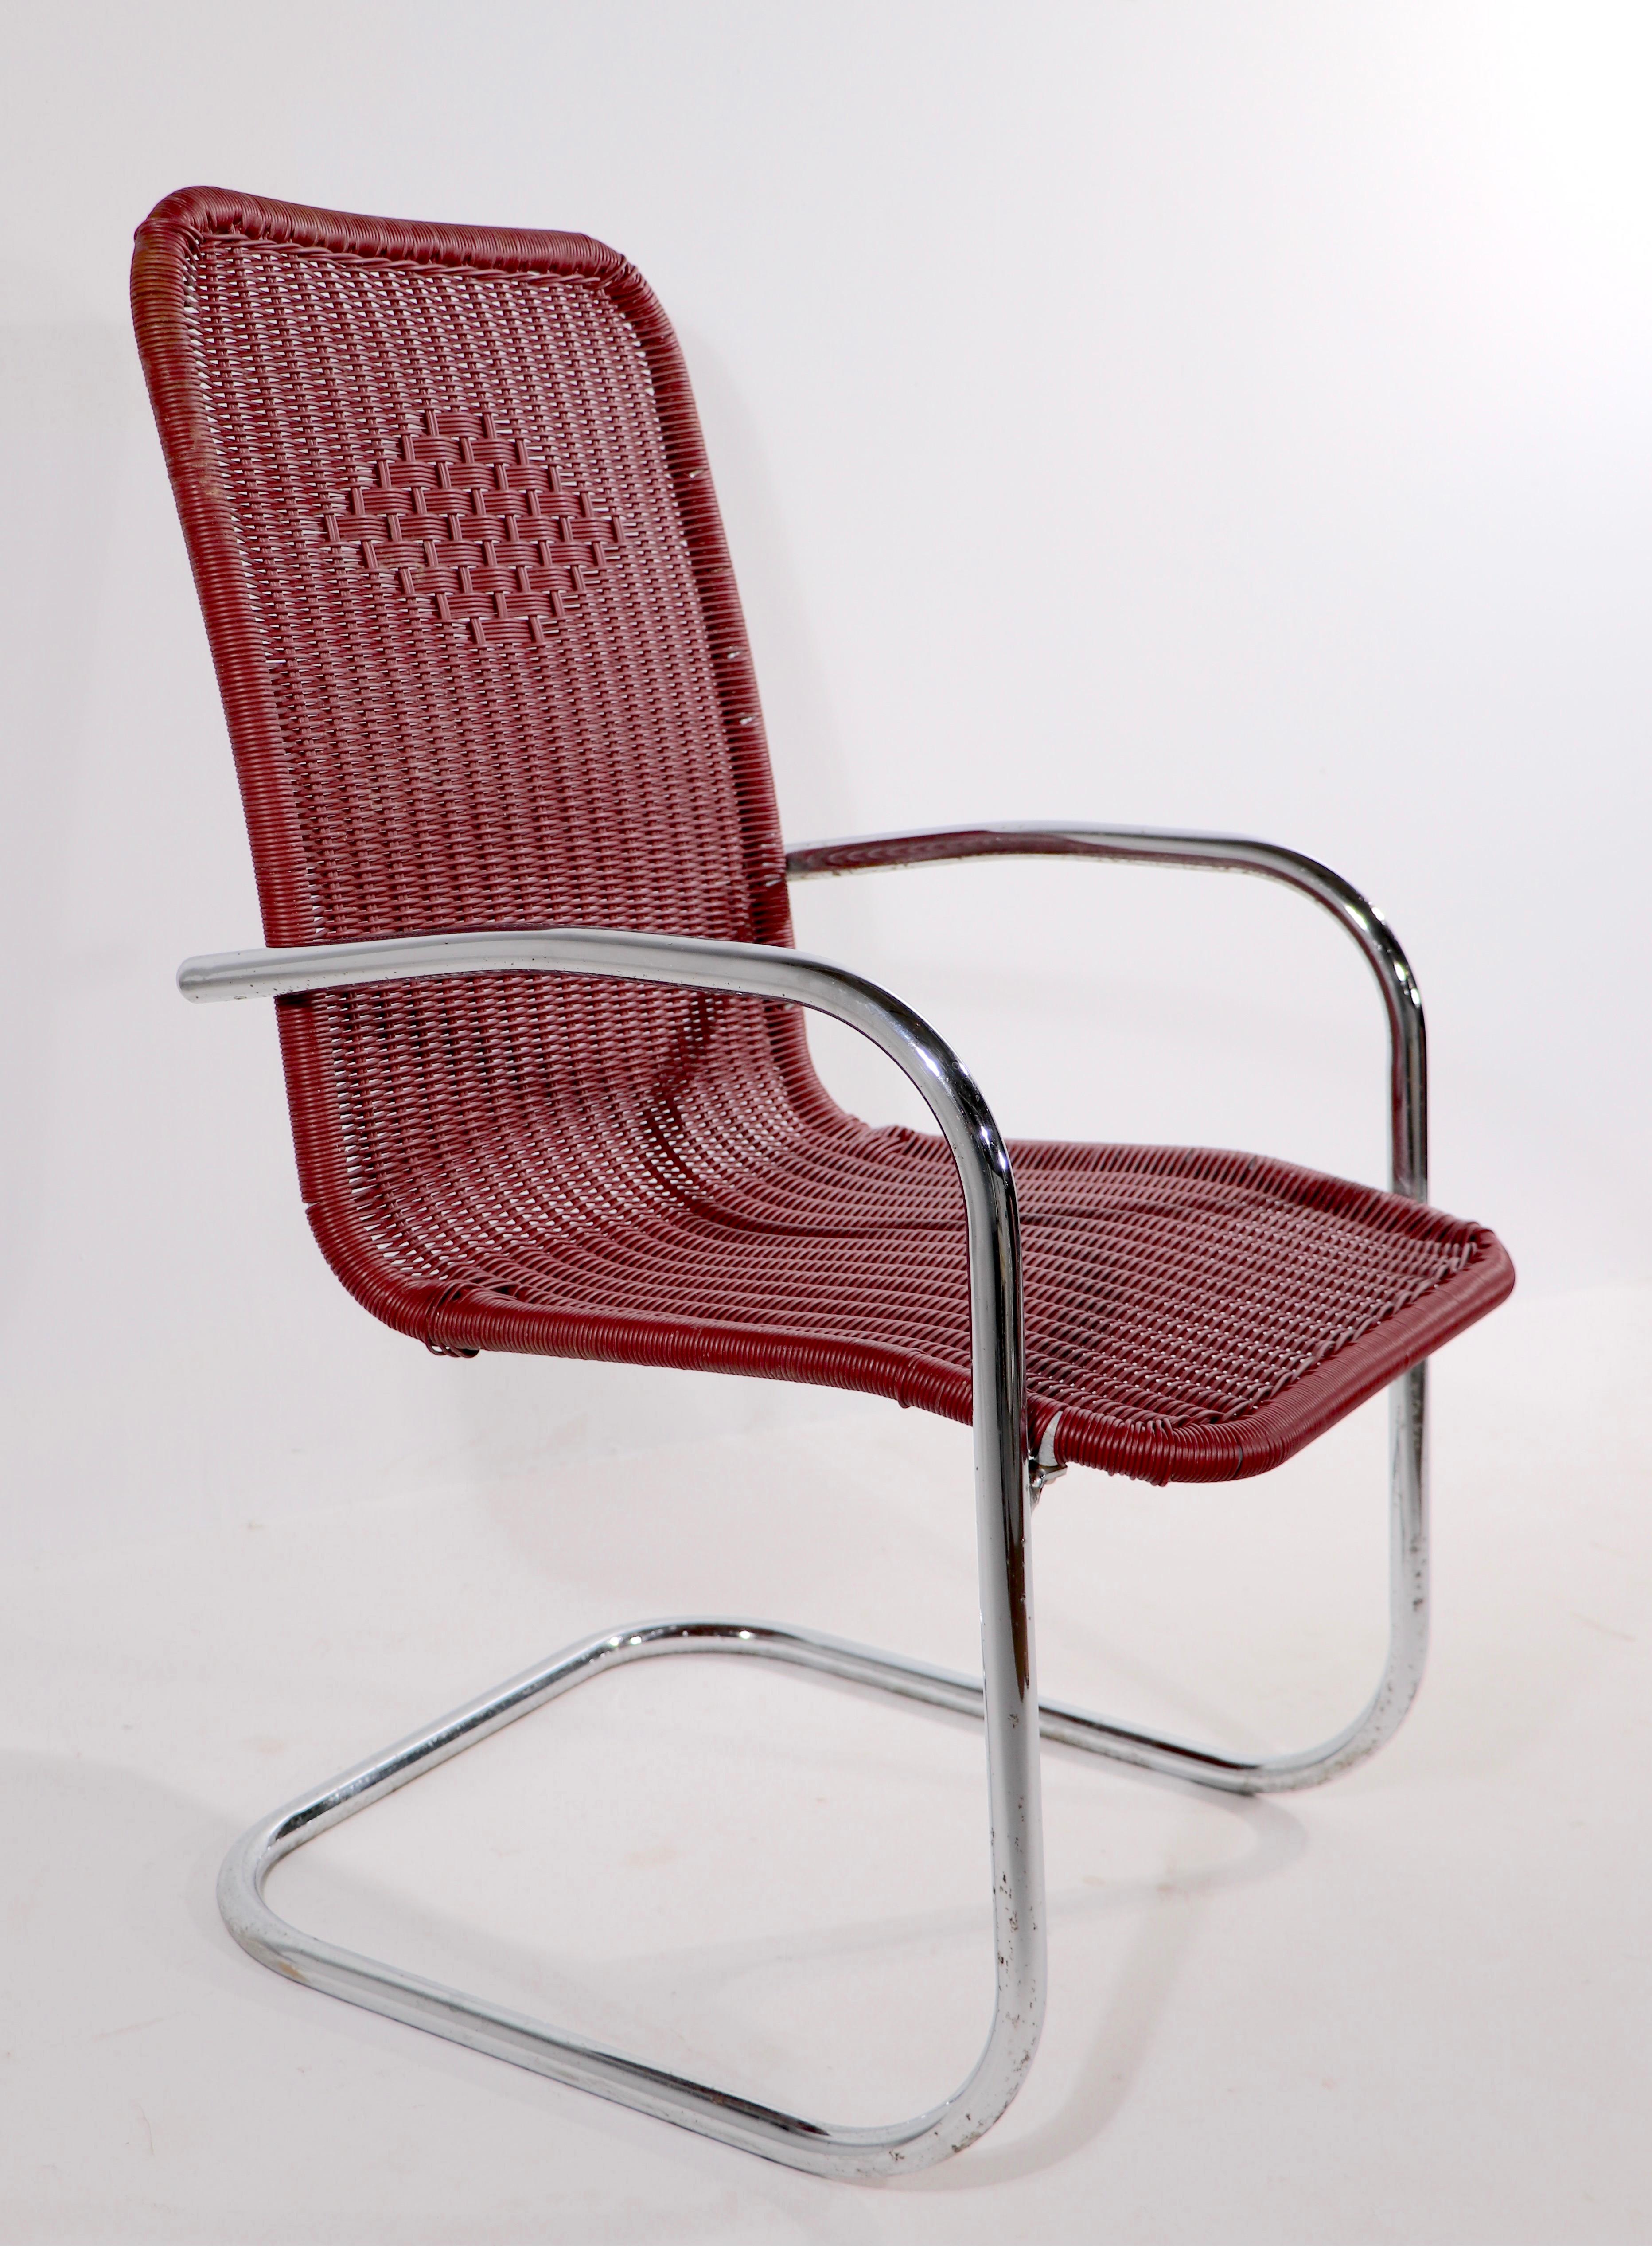 Pr. Tubular Chrome and Woven Plastic Cantilevered Lounge Chairs In Good Condition For Sale In New York, NY